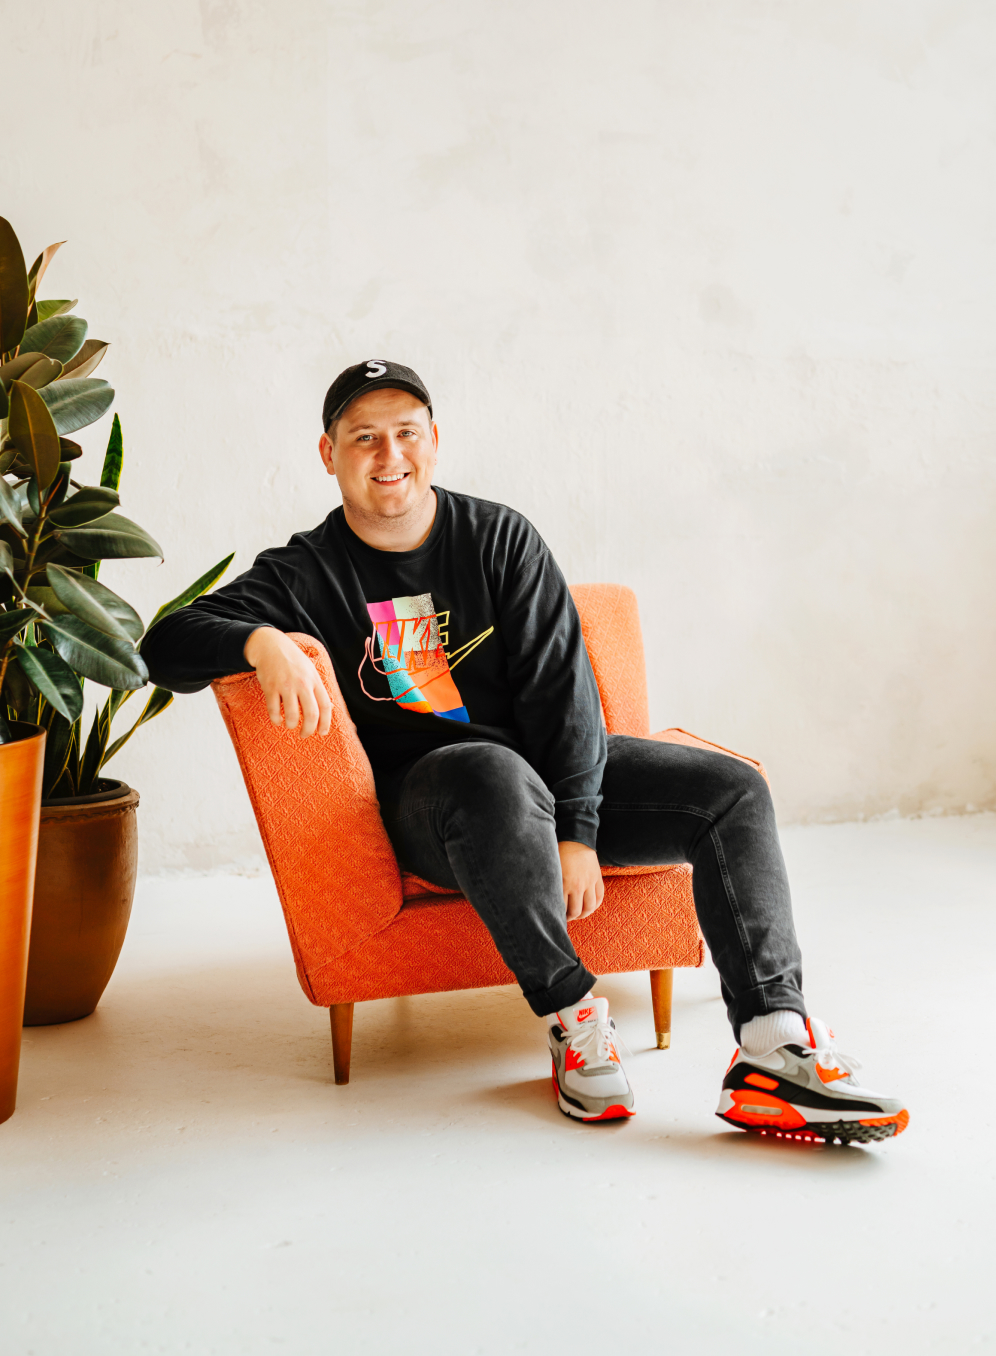 Adam sat on a vintage orange chair smiling wearing a baseball cap, Nike airman sneakers, jeans and a long sleeve Nike T-shirt